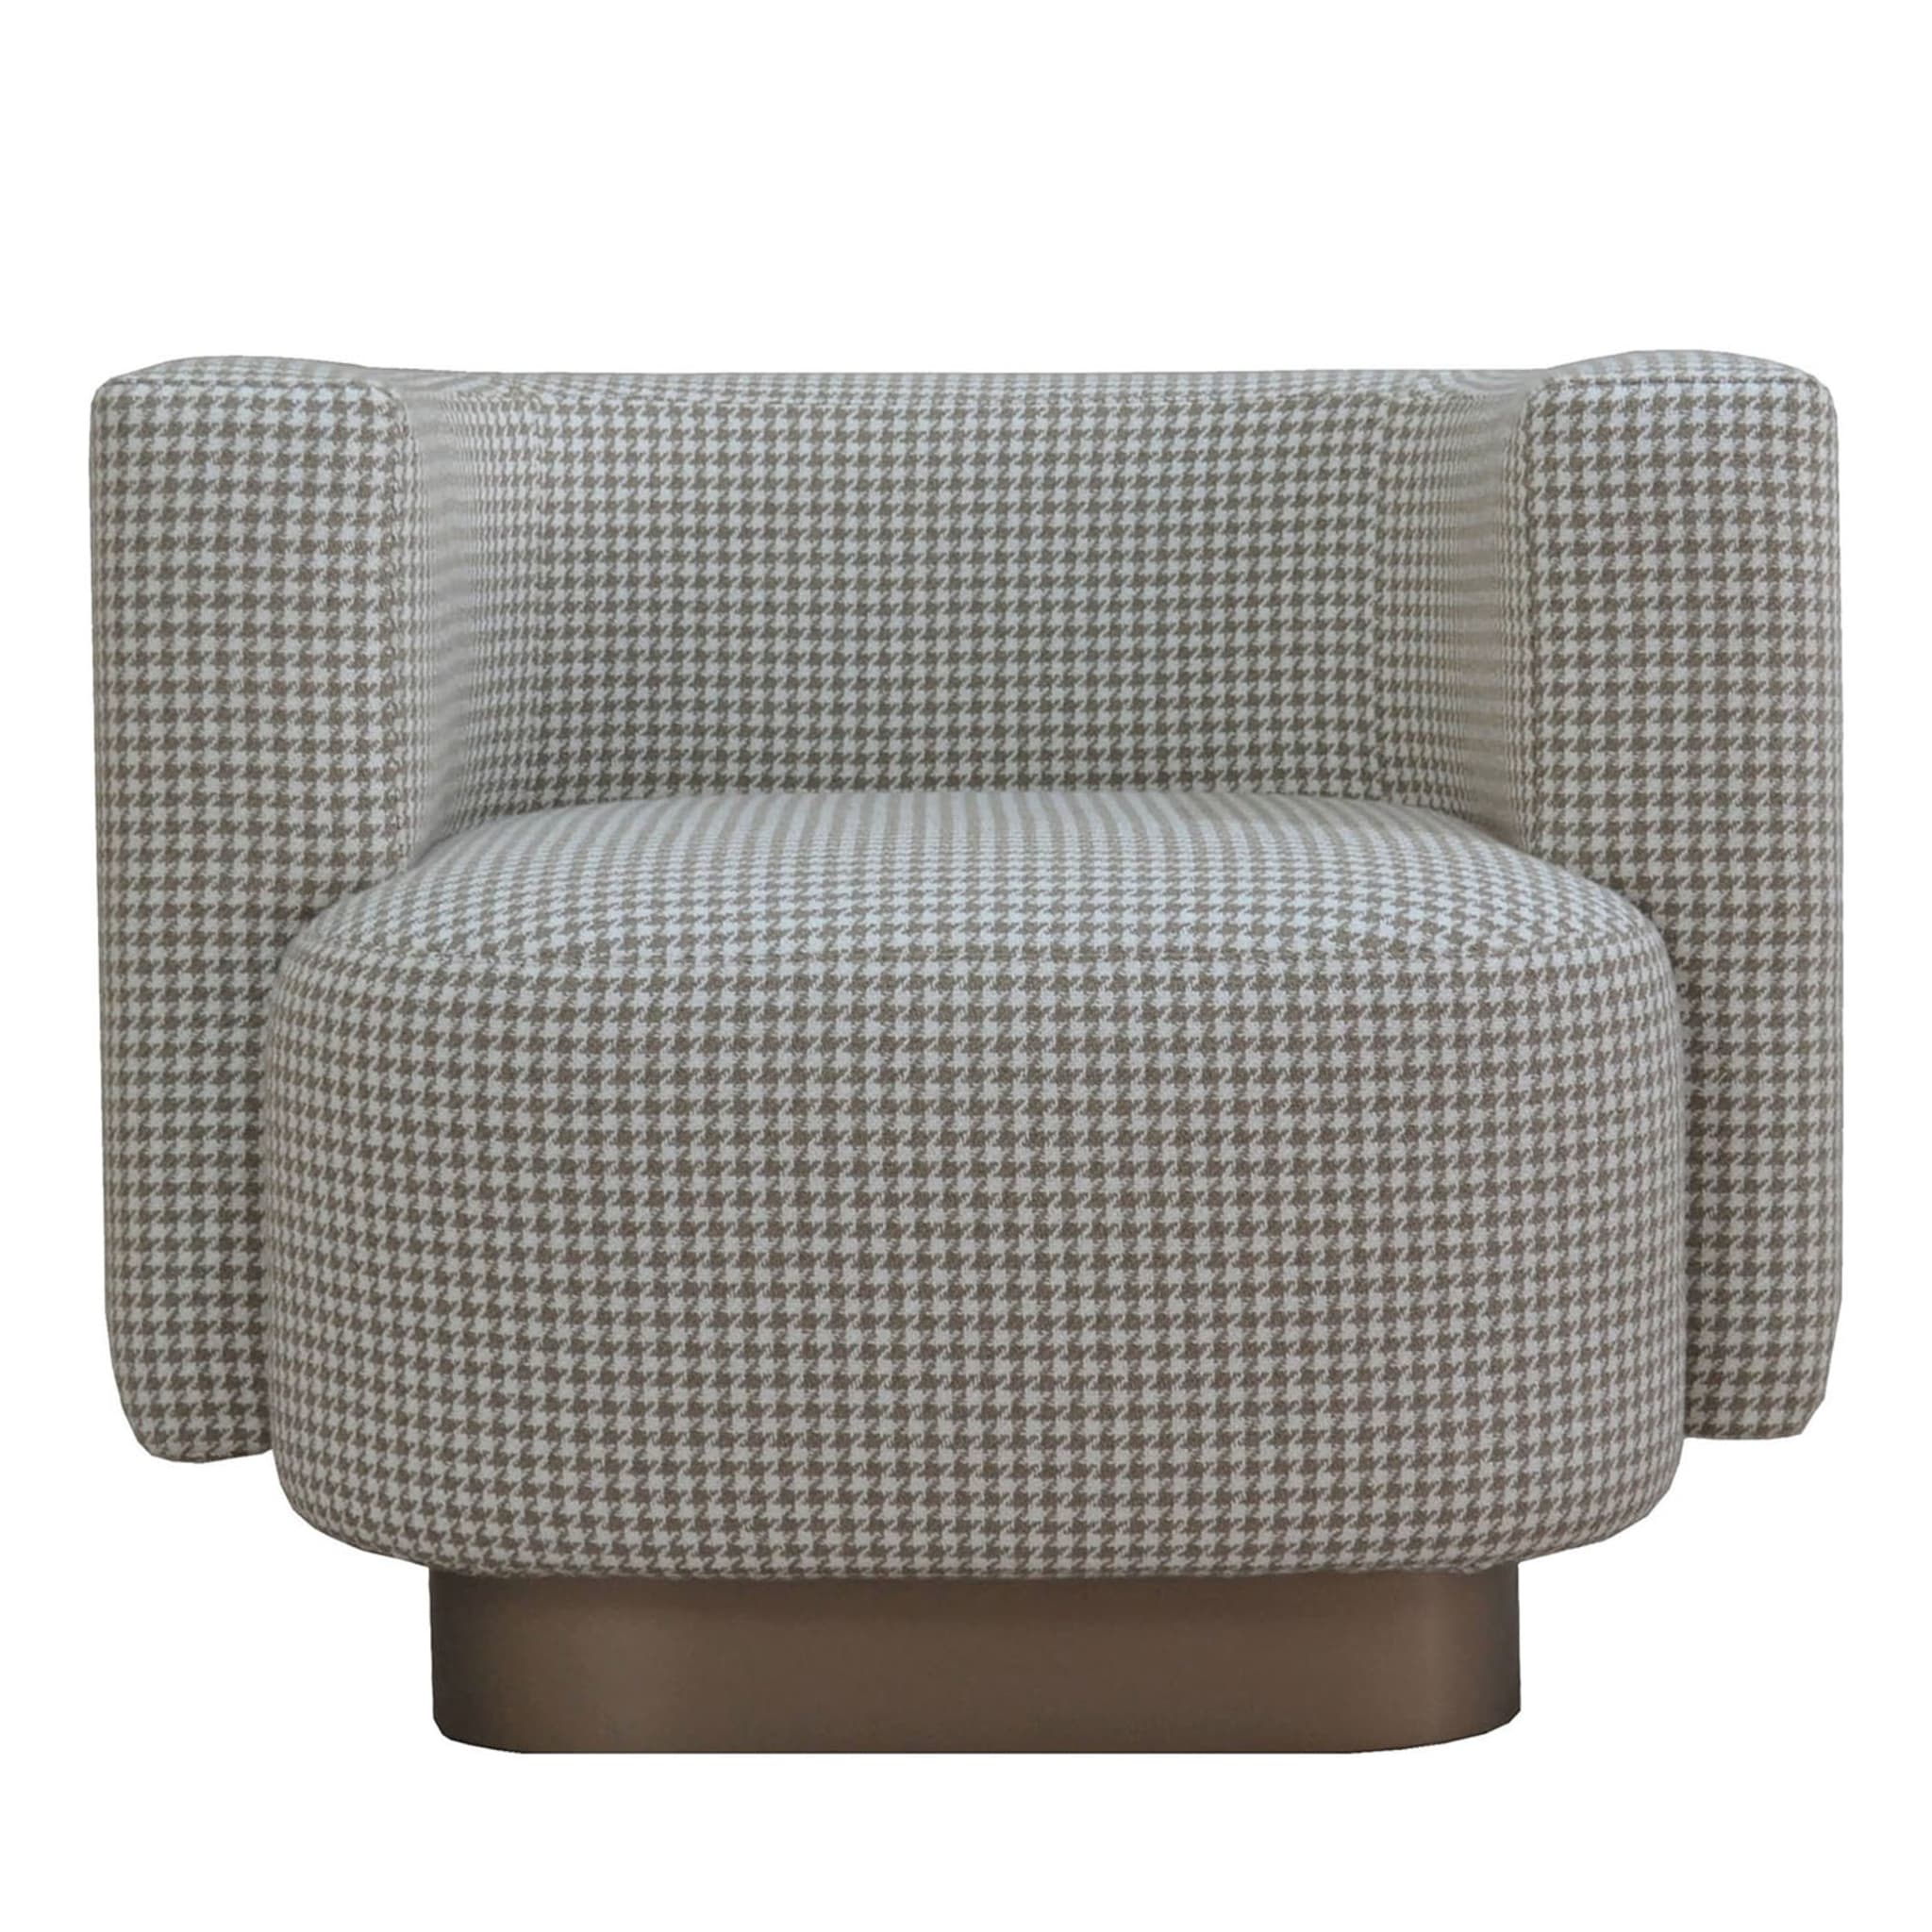  Italian Contemporary Lounge Upholstered Armchair  - Main view